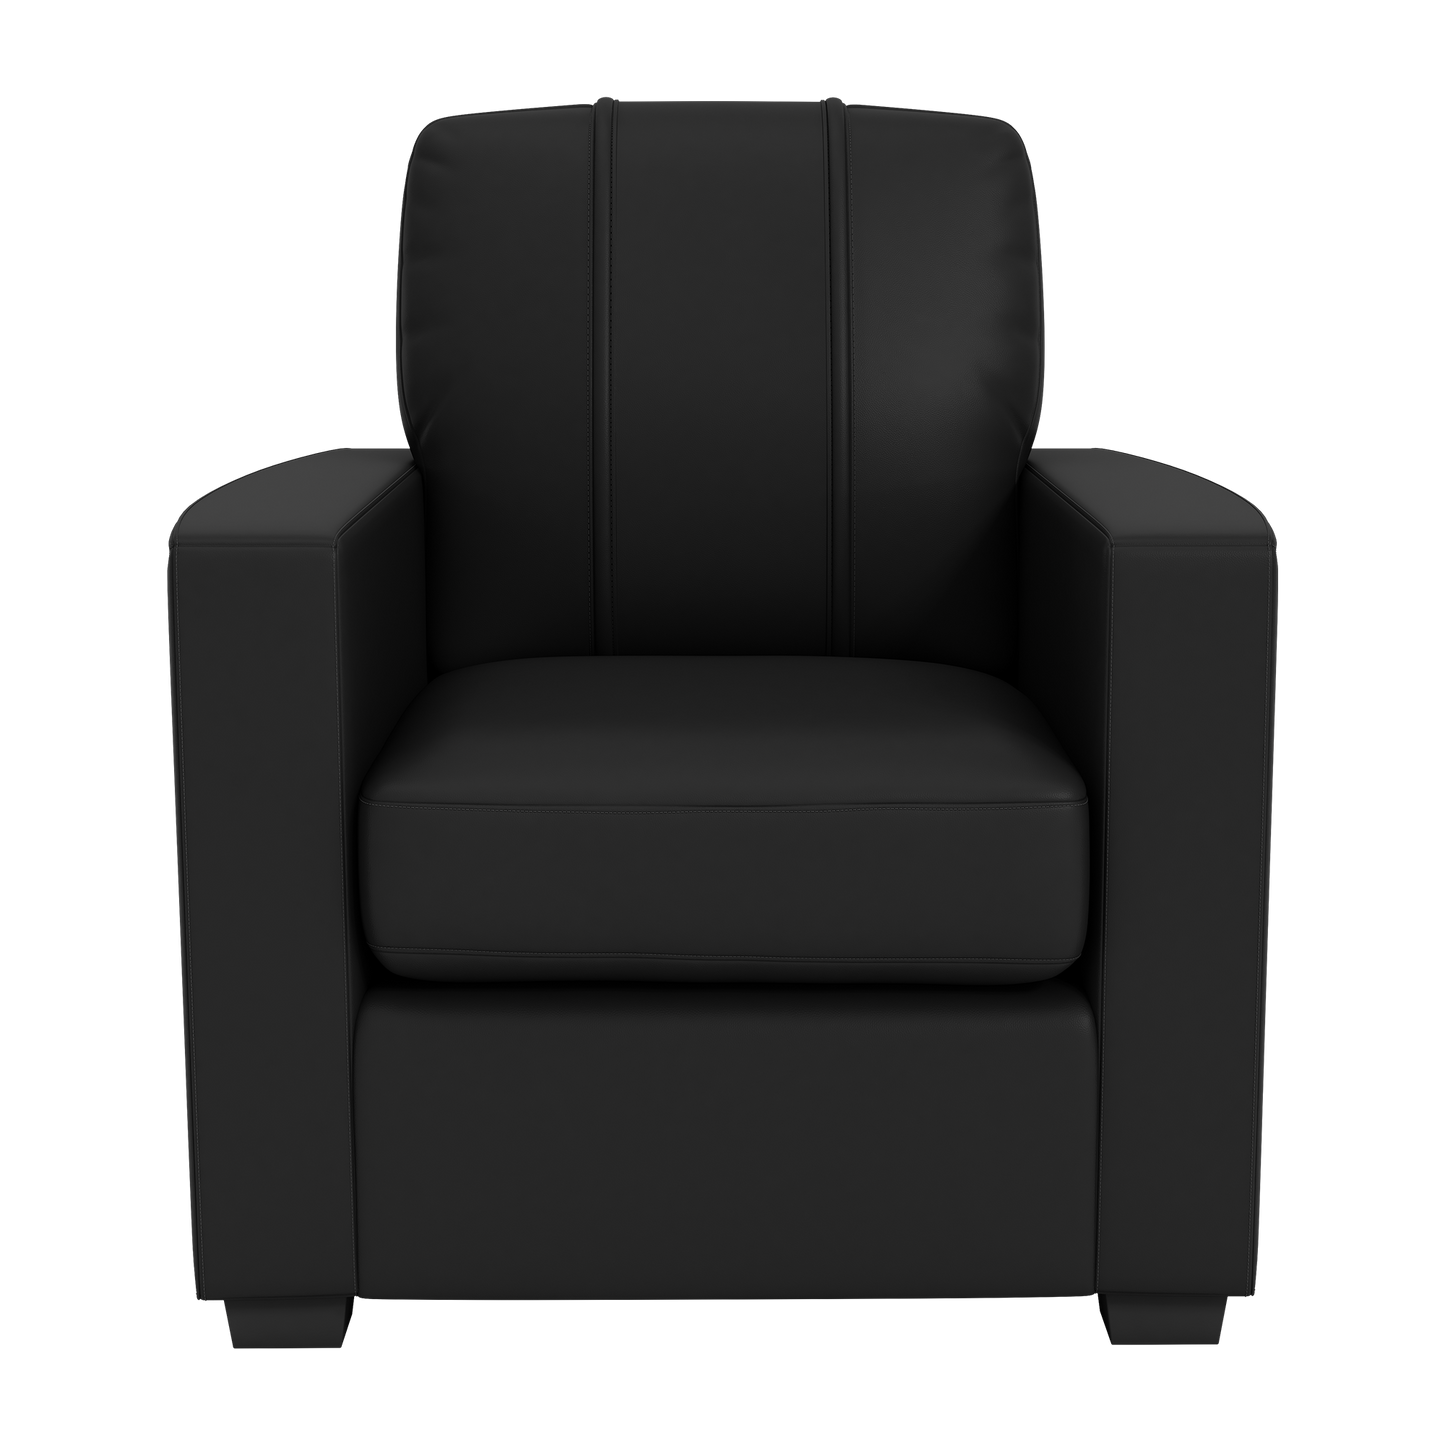 Silver Club Chair with Los Angeles Lakers Secondary